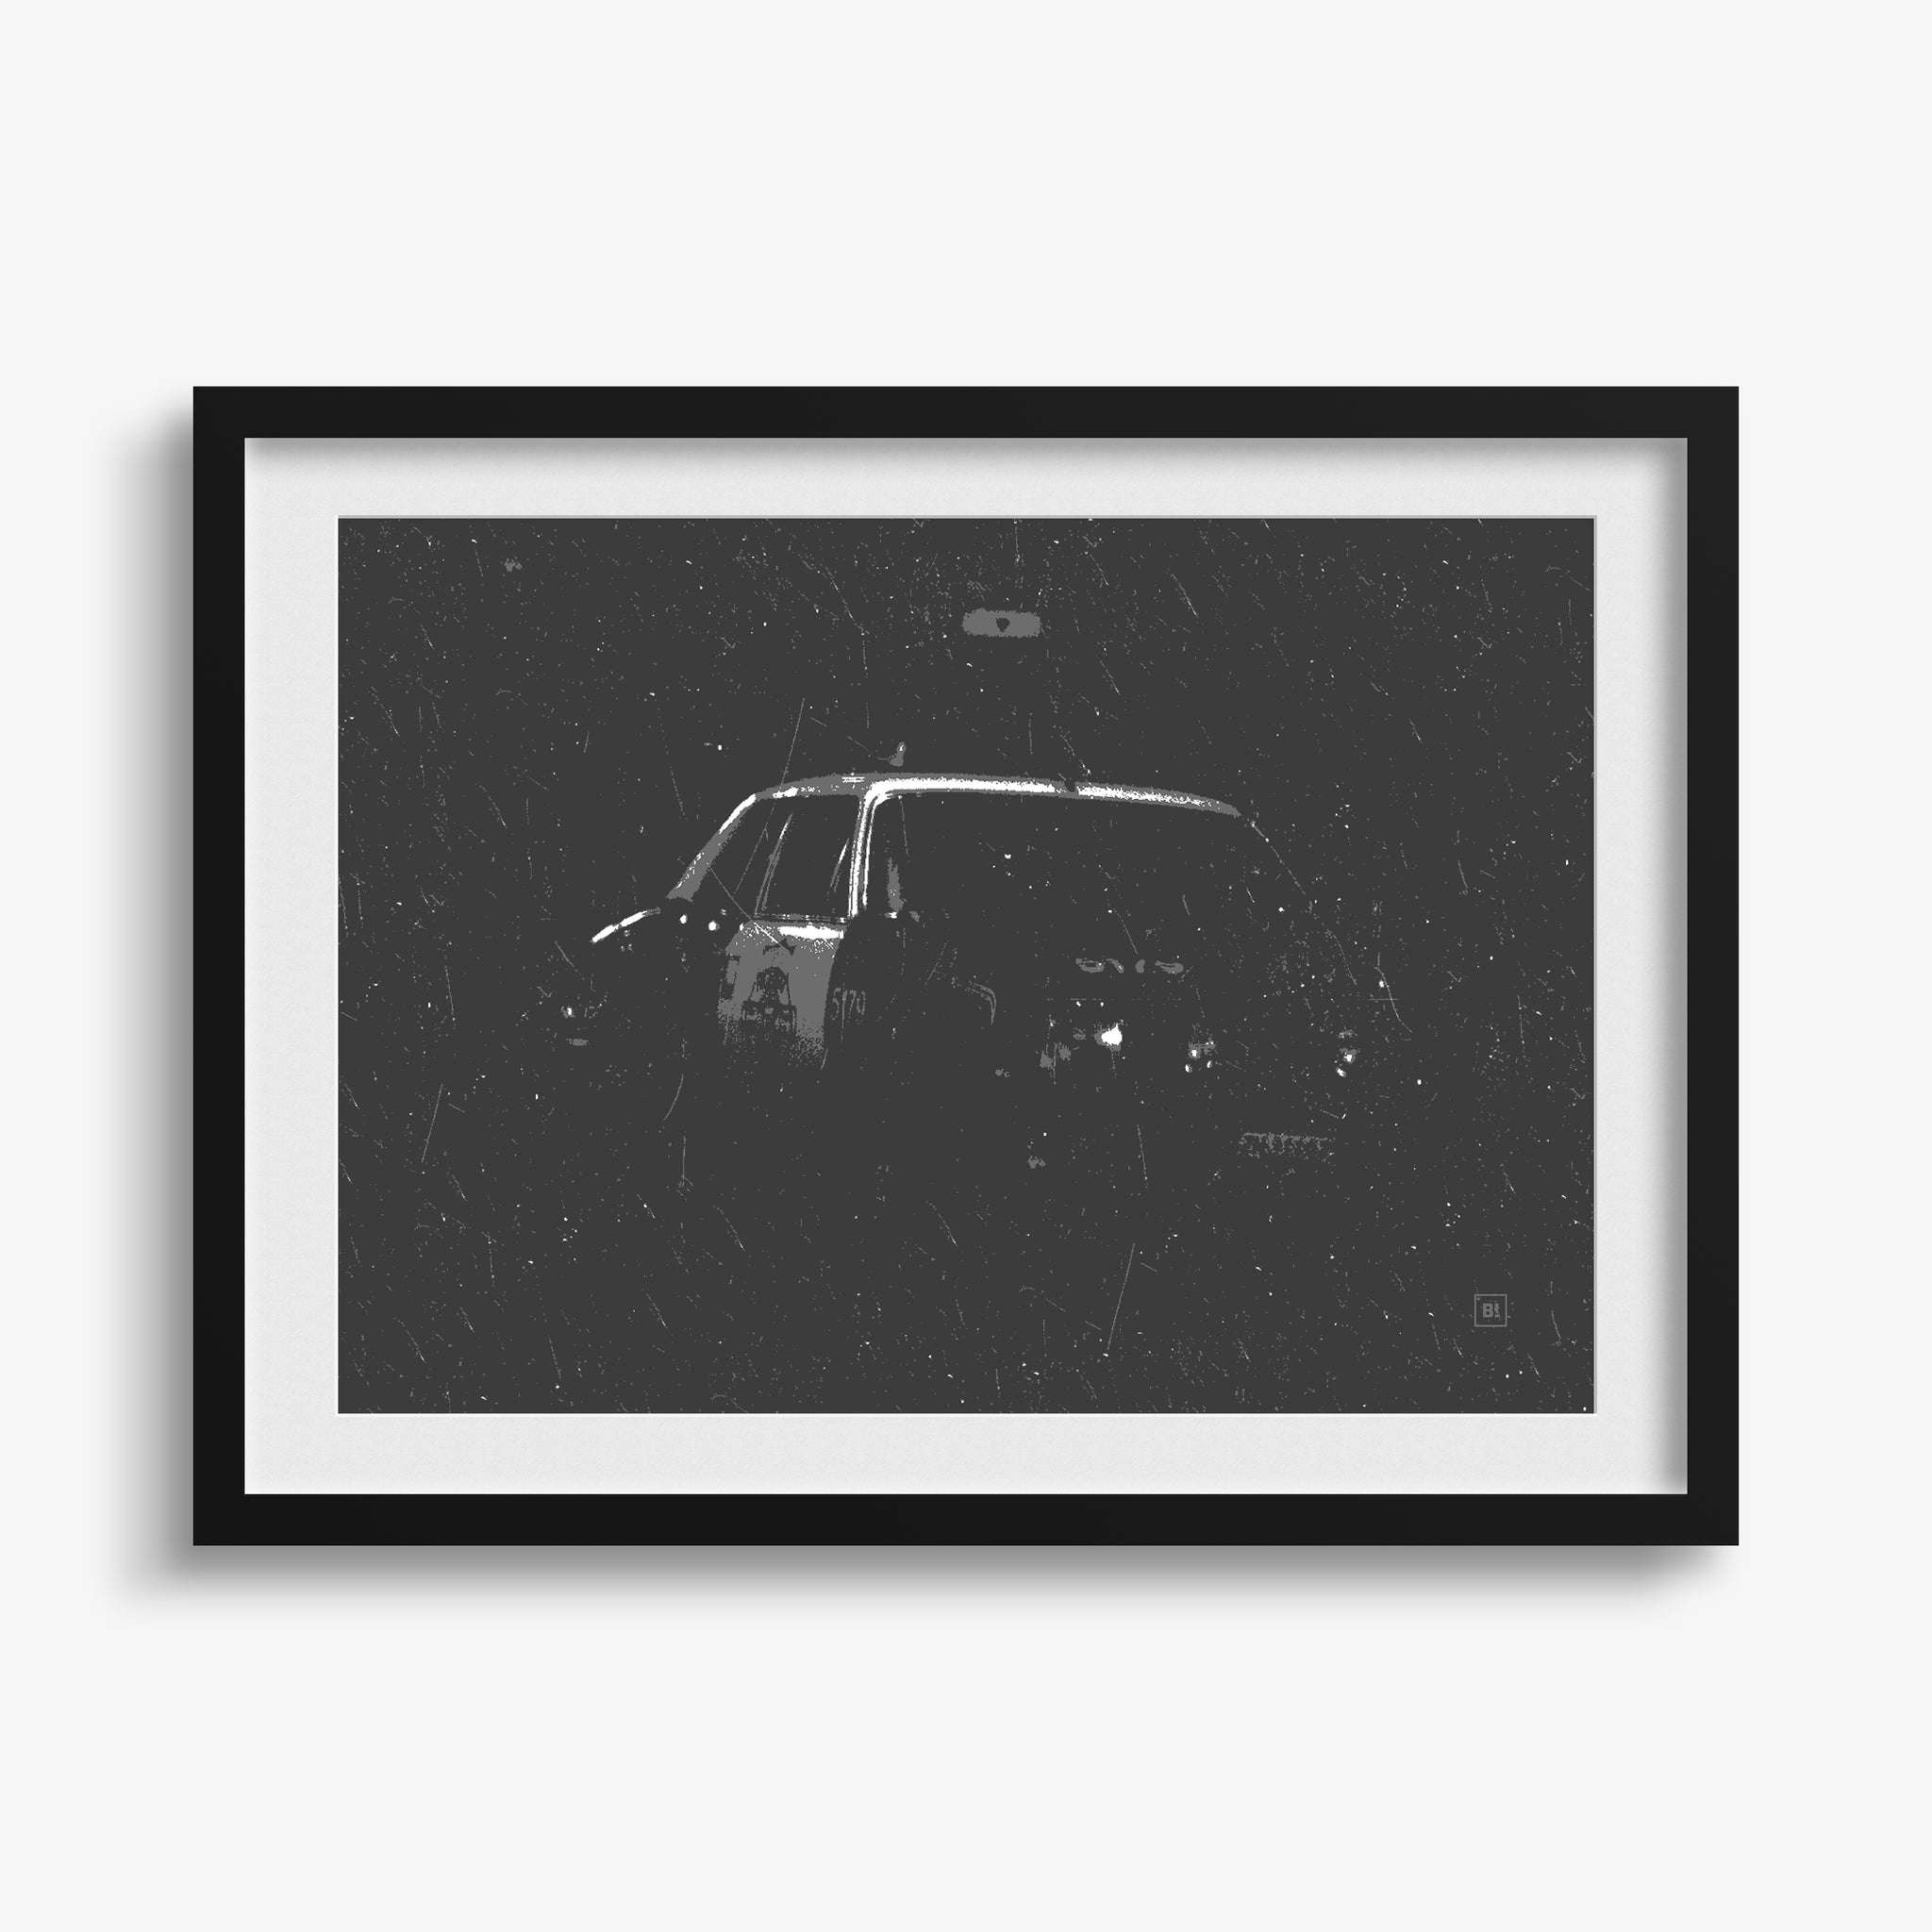 Be inspired by our black and white "5179" art print! This artwork was printed using the giclée process on archival acid-free paper and is presented in a black frame with passe-partout, capturing its timeless beauty in every detail.